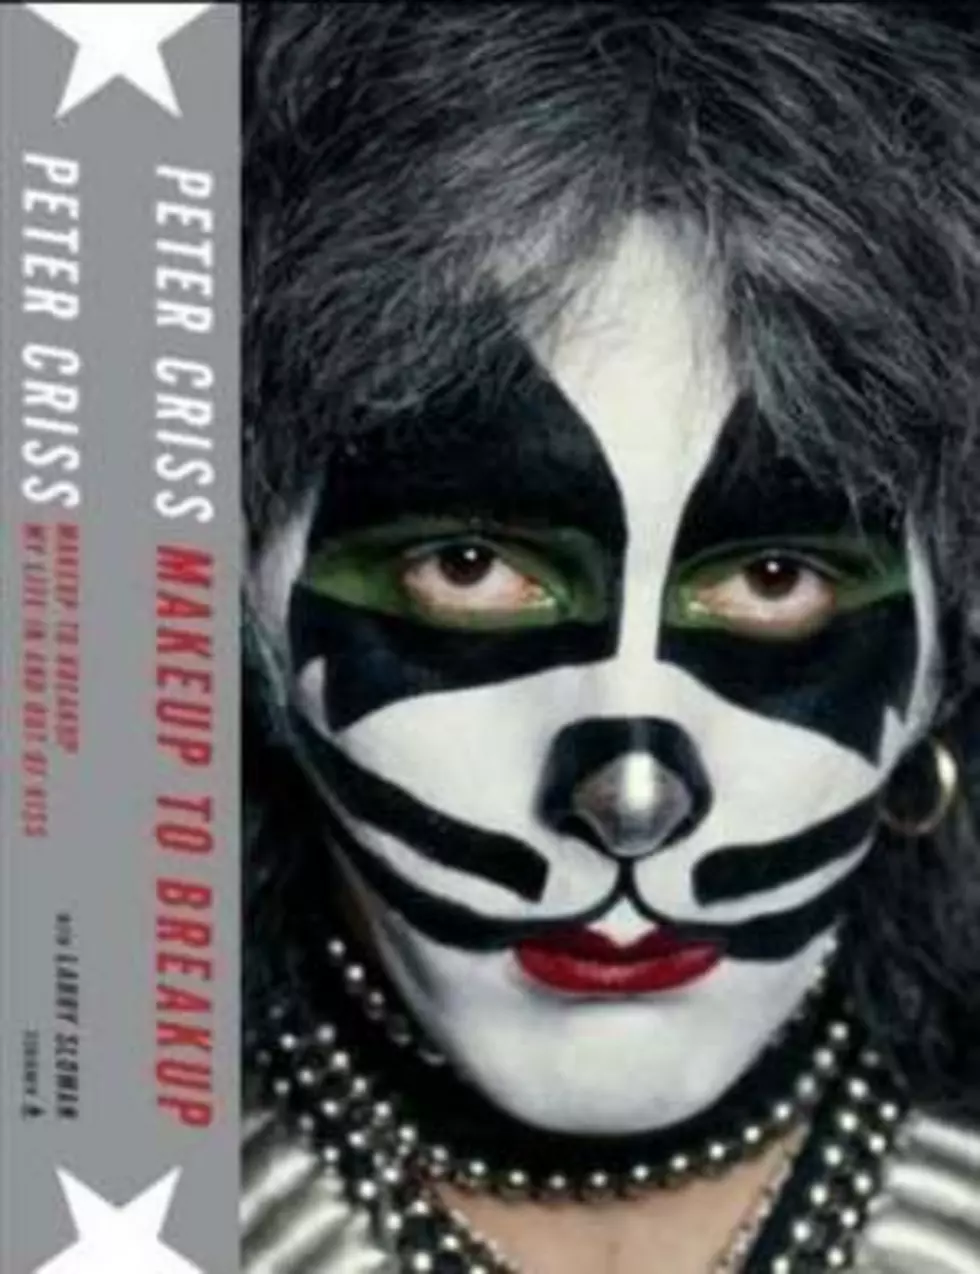 Peter Criss Talks About Childhood in Excerpt from New Book